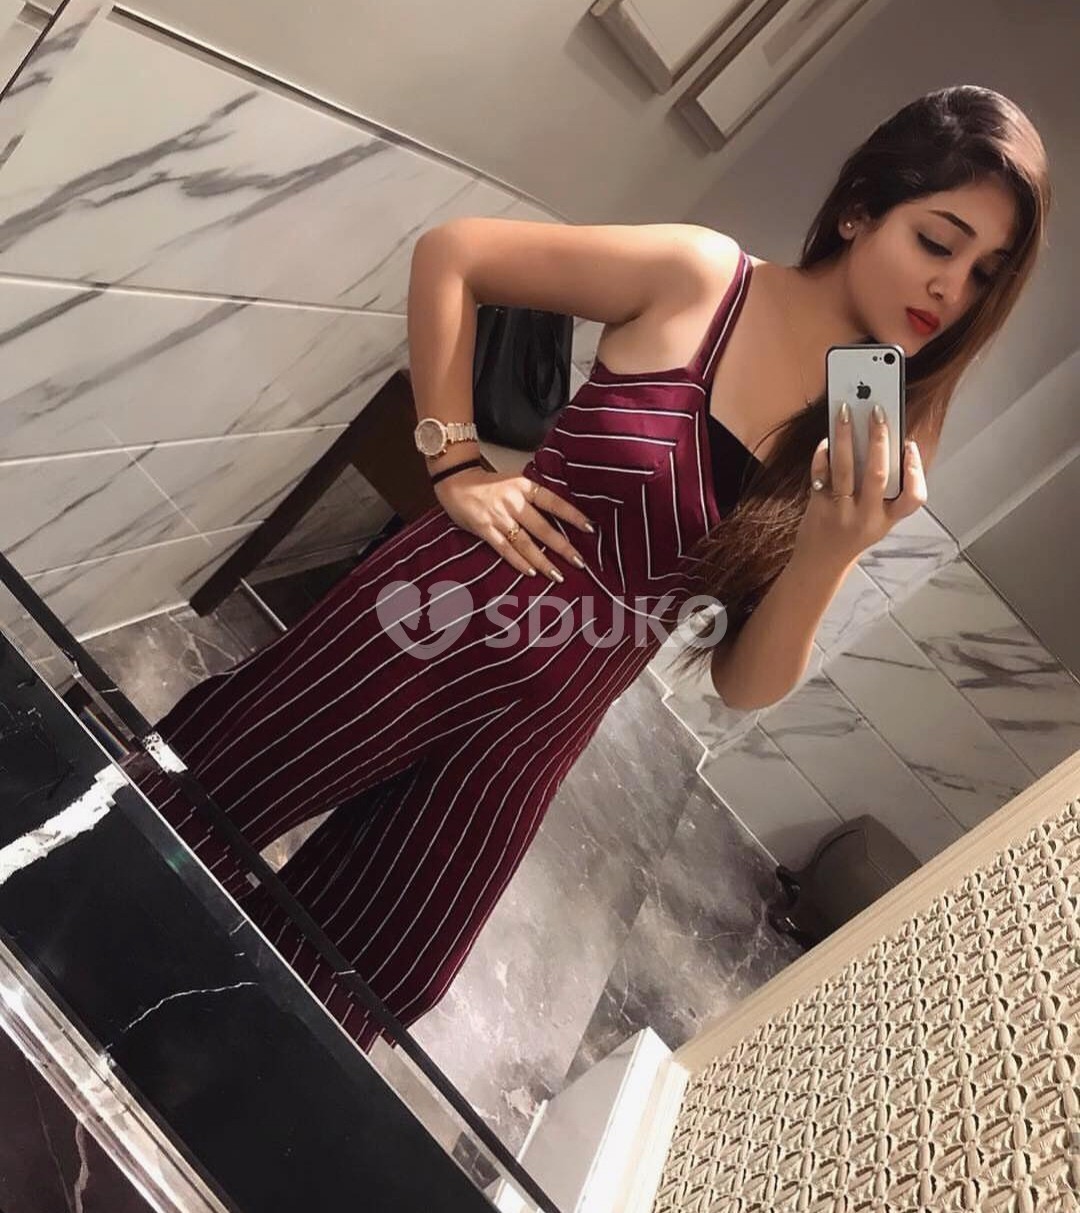 Jaipur BEST call girl service outcall incall available myself Manisha Sharma low cost genuine service